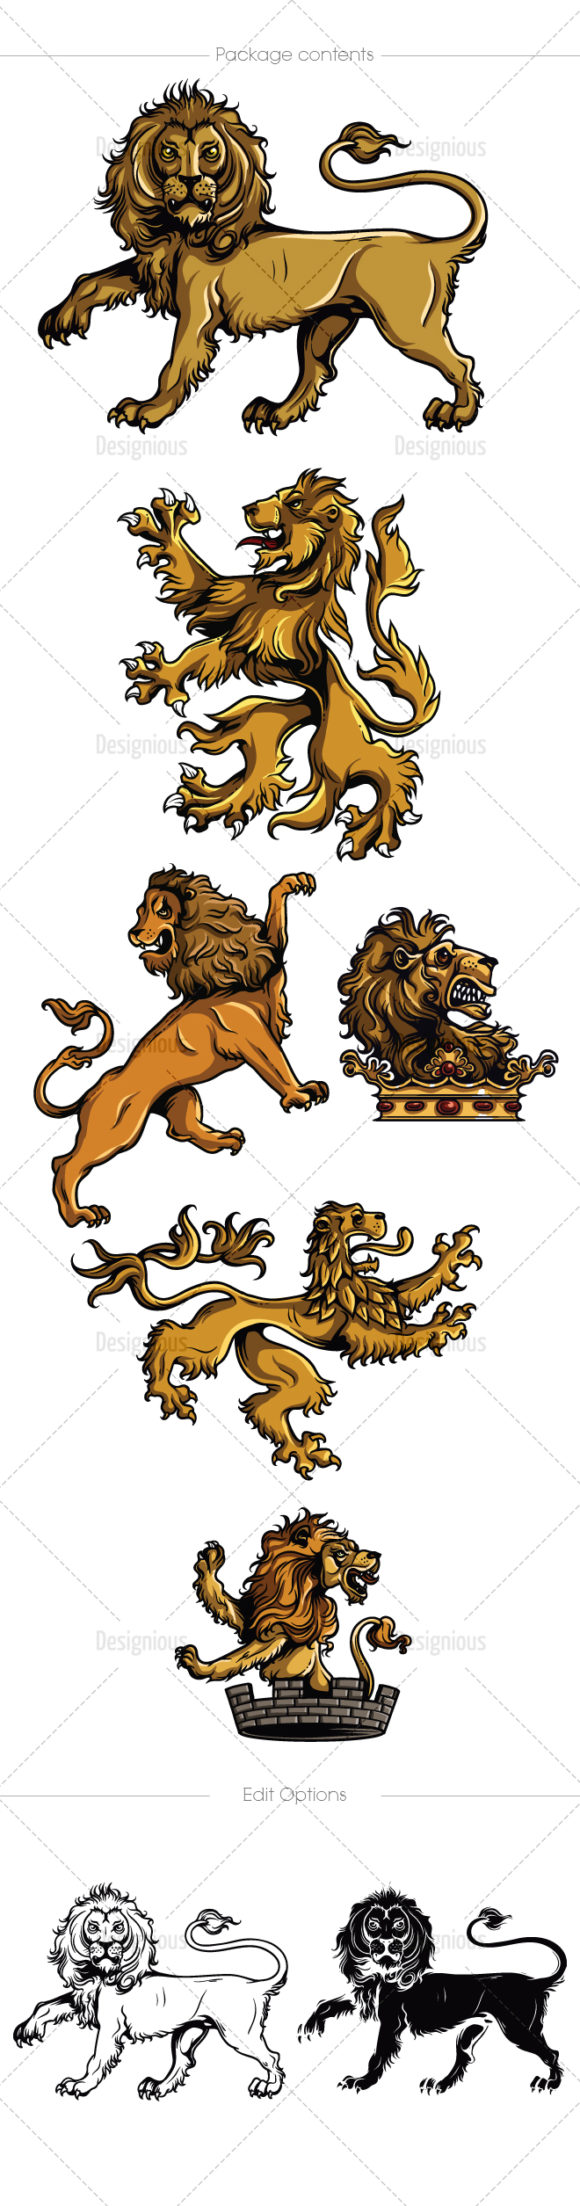 Gothic Lions Vector Pack 1 2